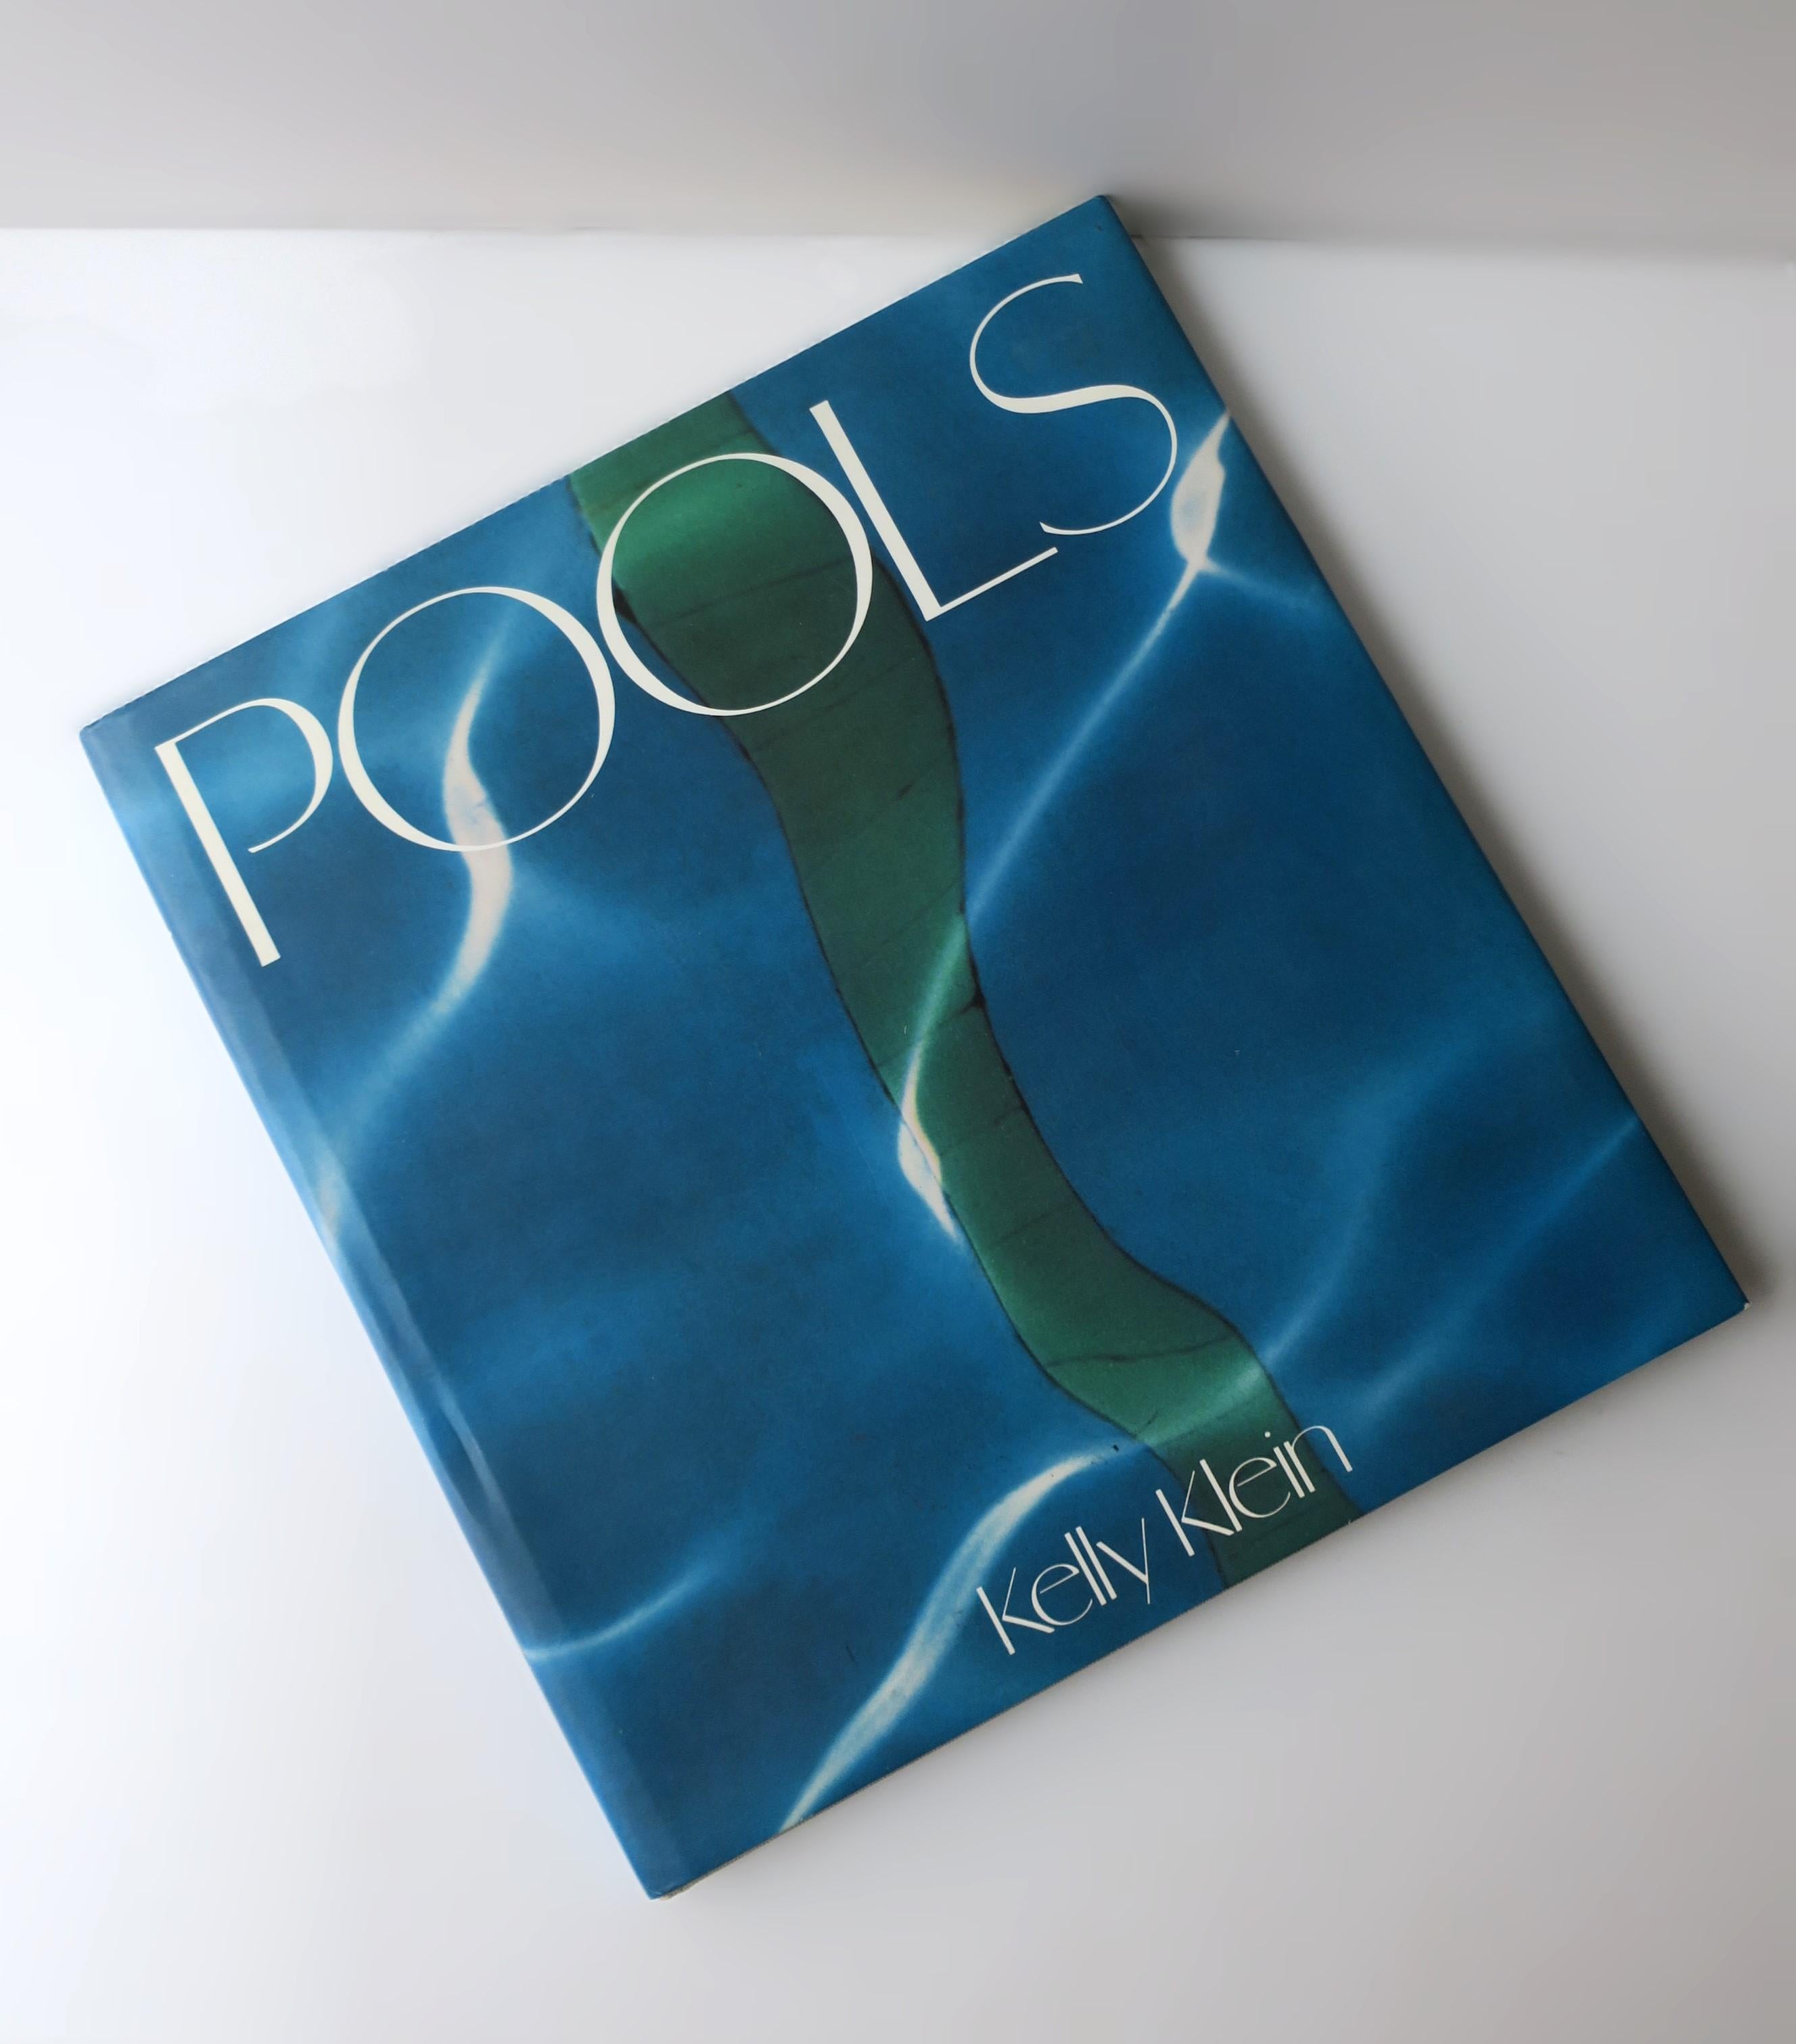 20th Century Pools by Kelly Klein an Architecture Coffee Table or Library Book, 1992 For Sale